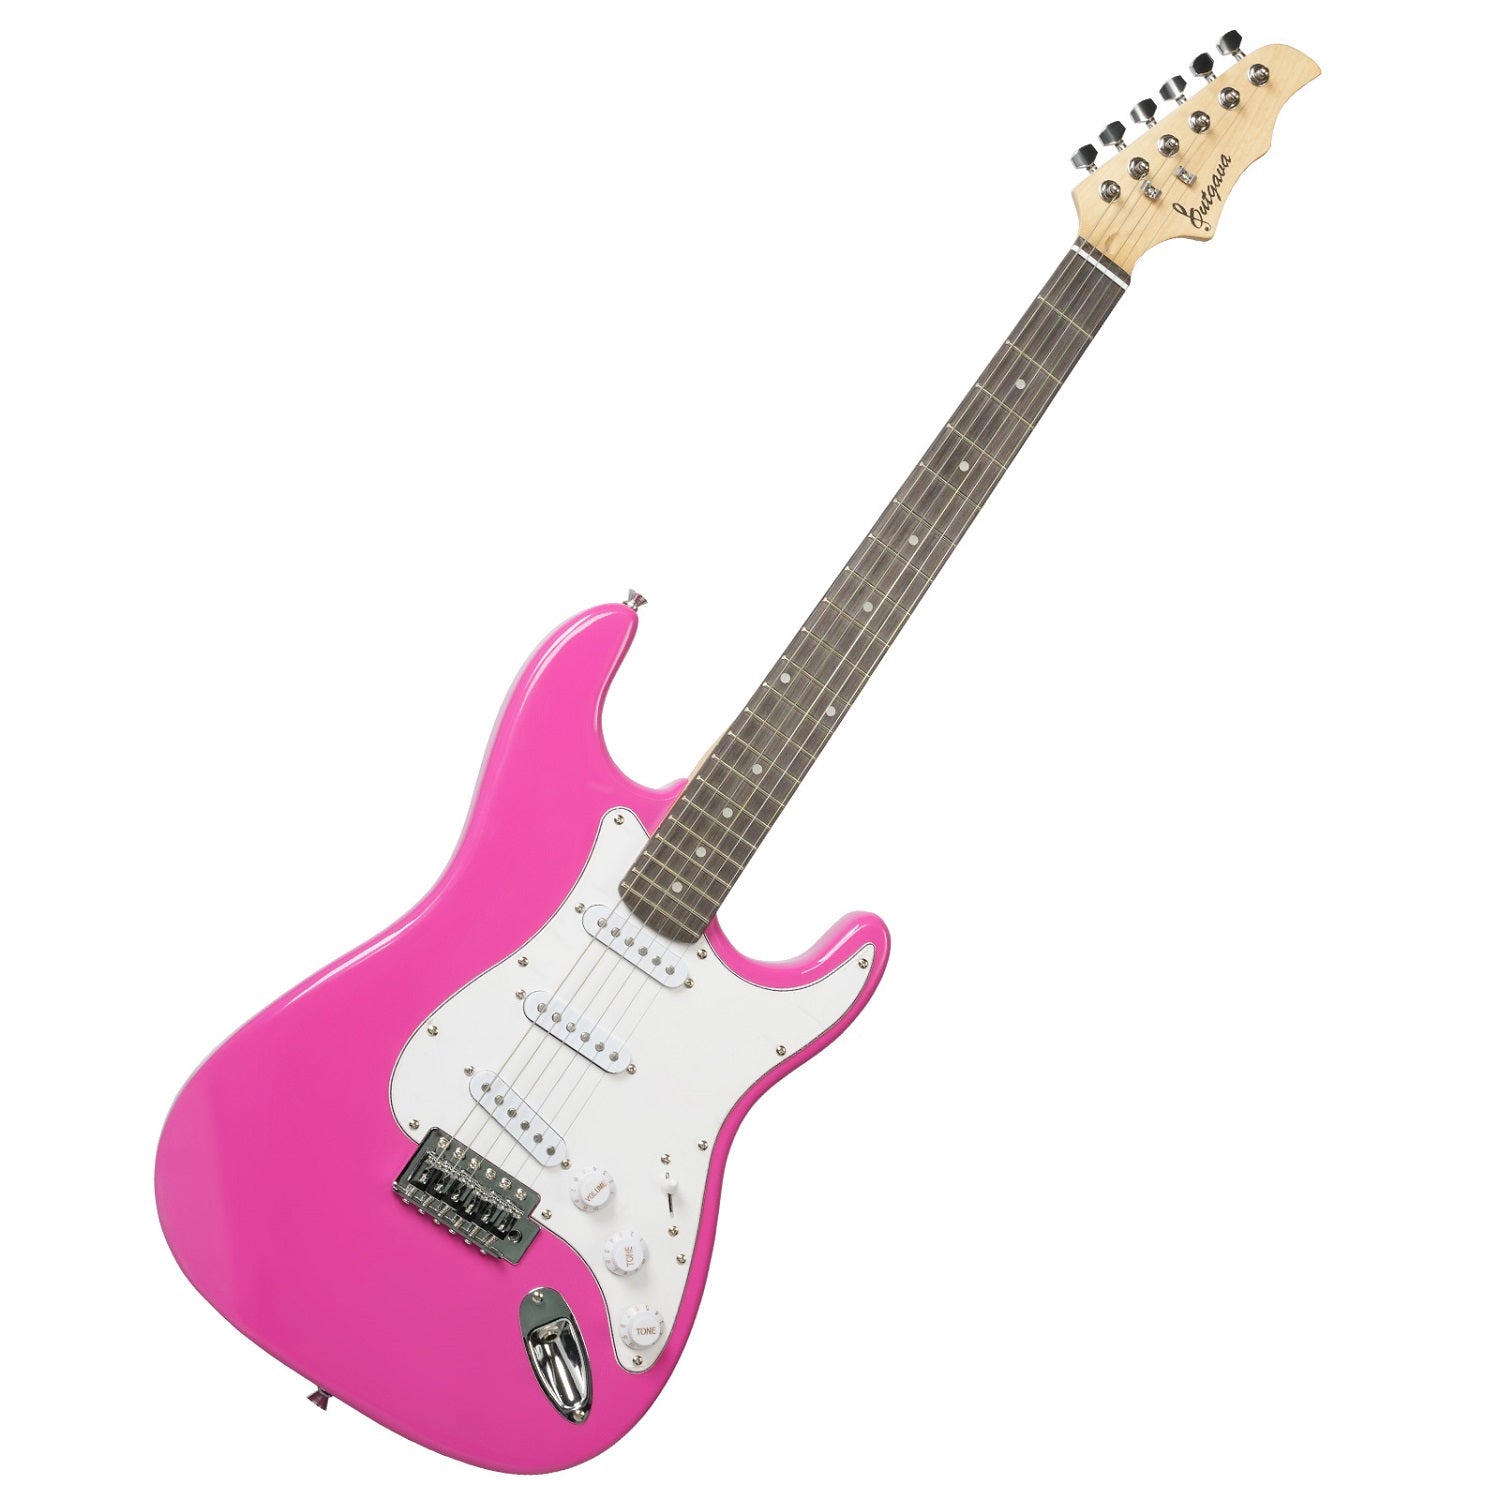 (Out of Stock) Entry Level Electric Guitar Set, 39" Teenage Electric Guitar w/ 15W Amplifier, Carrier Bag, Tuner, Strings, Picks, Cable, Pink